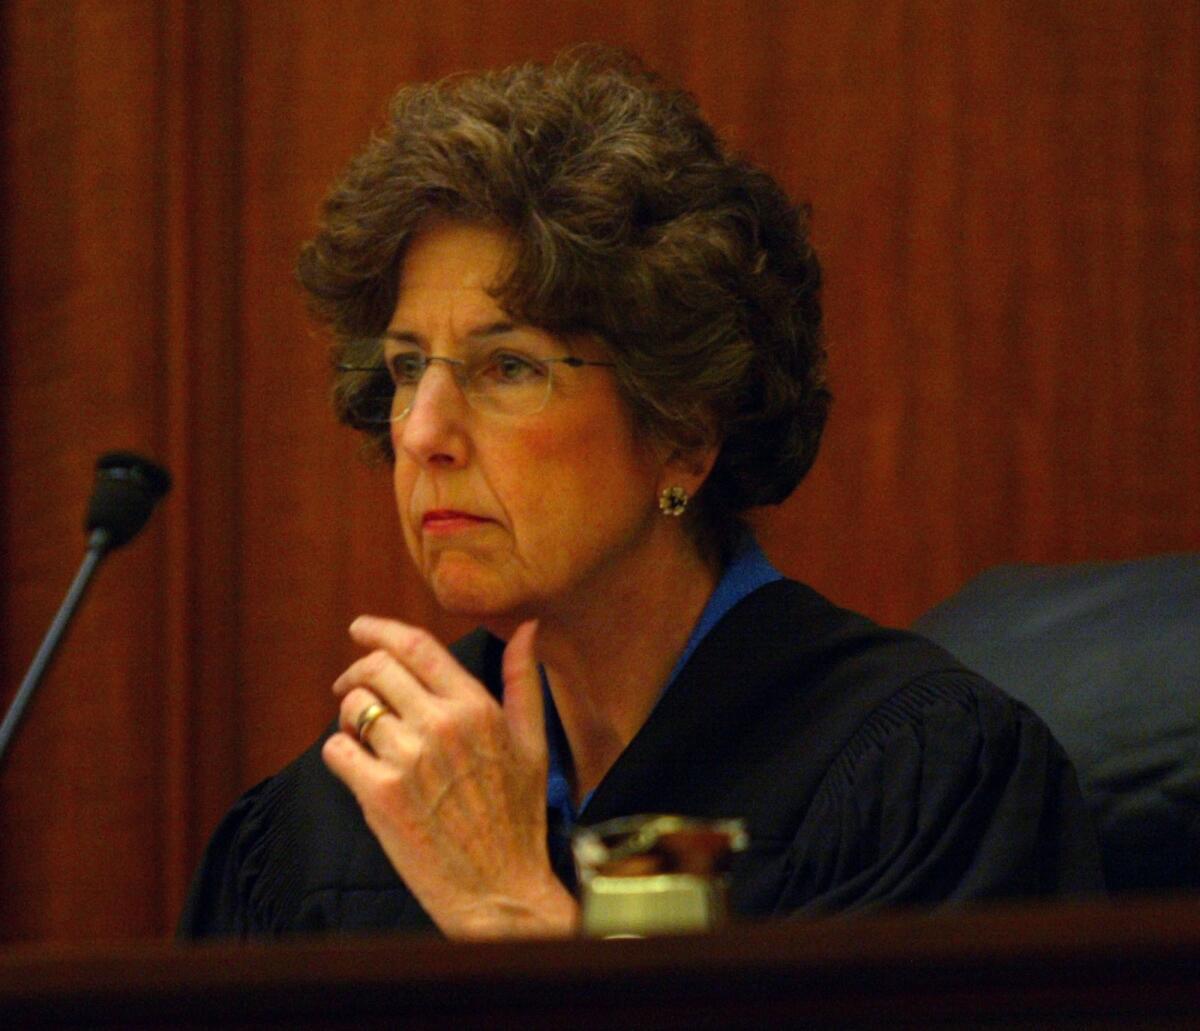 Justice Carol A. Corrigan of the California Supreme Court, pictured in 2006, wrote a decision in which a man's convictions in a death penalty case were thrown out, citing juror misconduct.